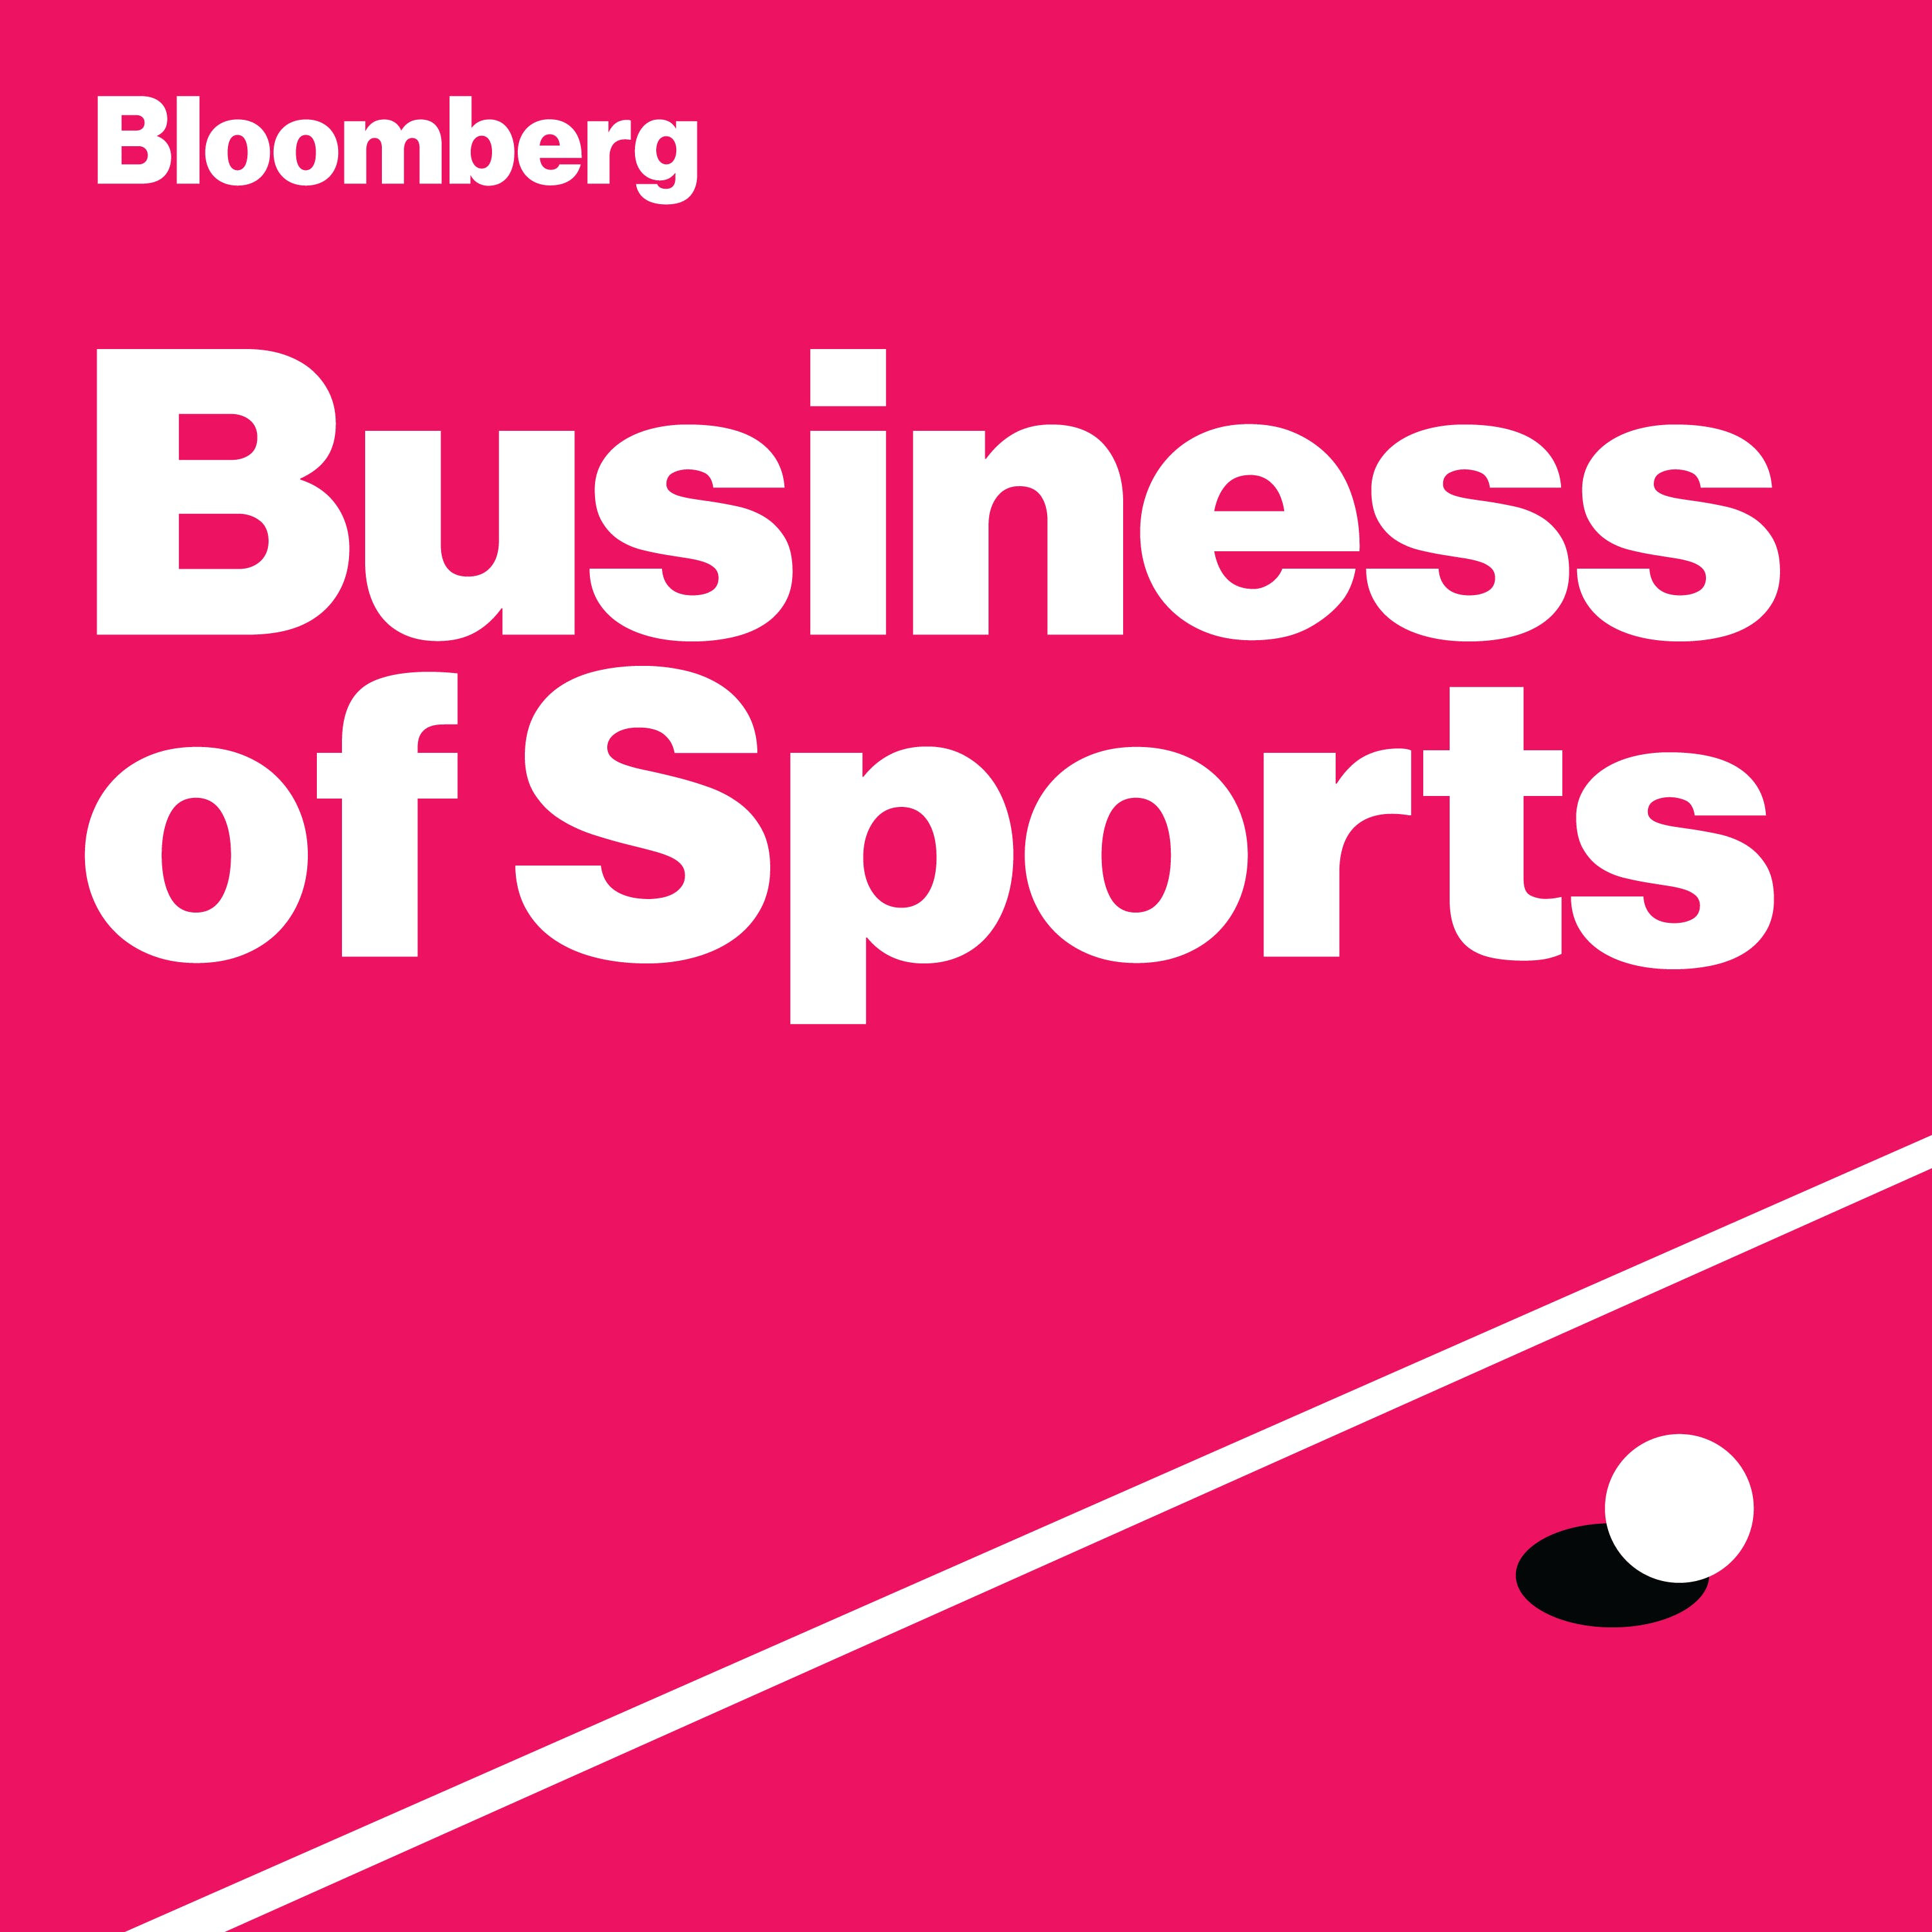 Jeter’s Hire, Daytona 500, the Winter Games: Sports Business